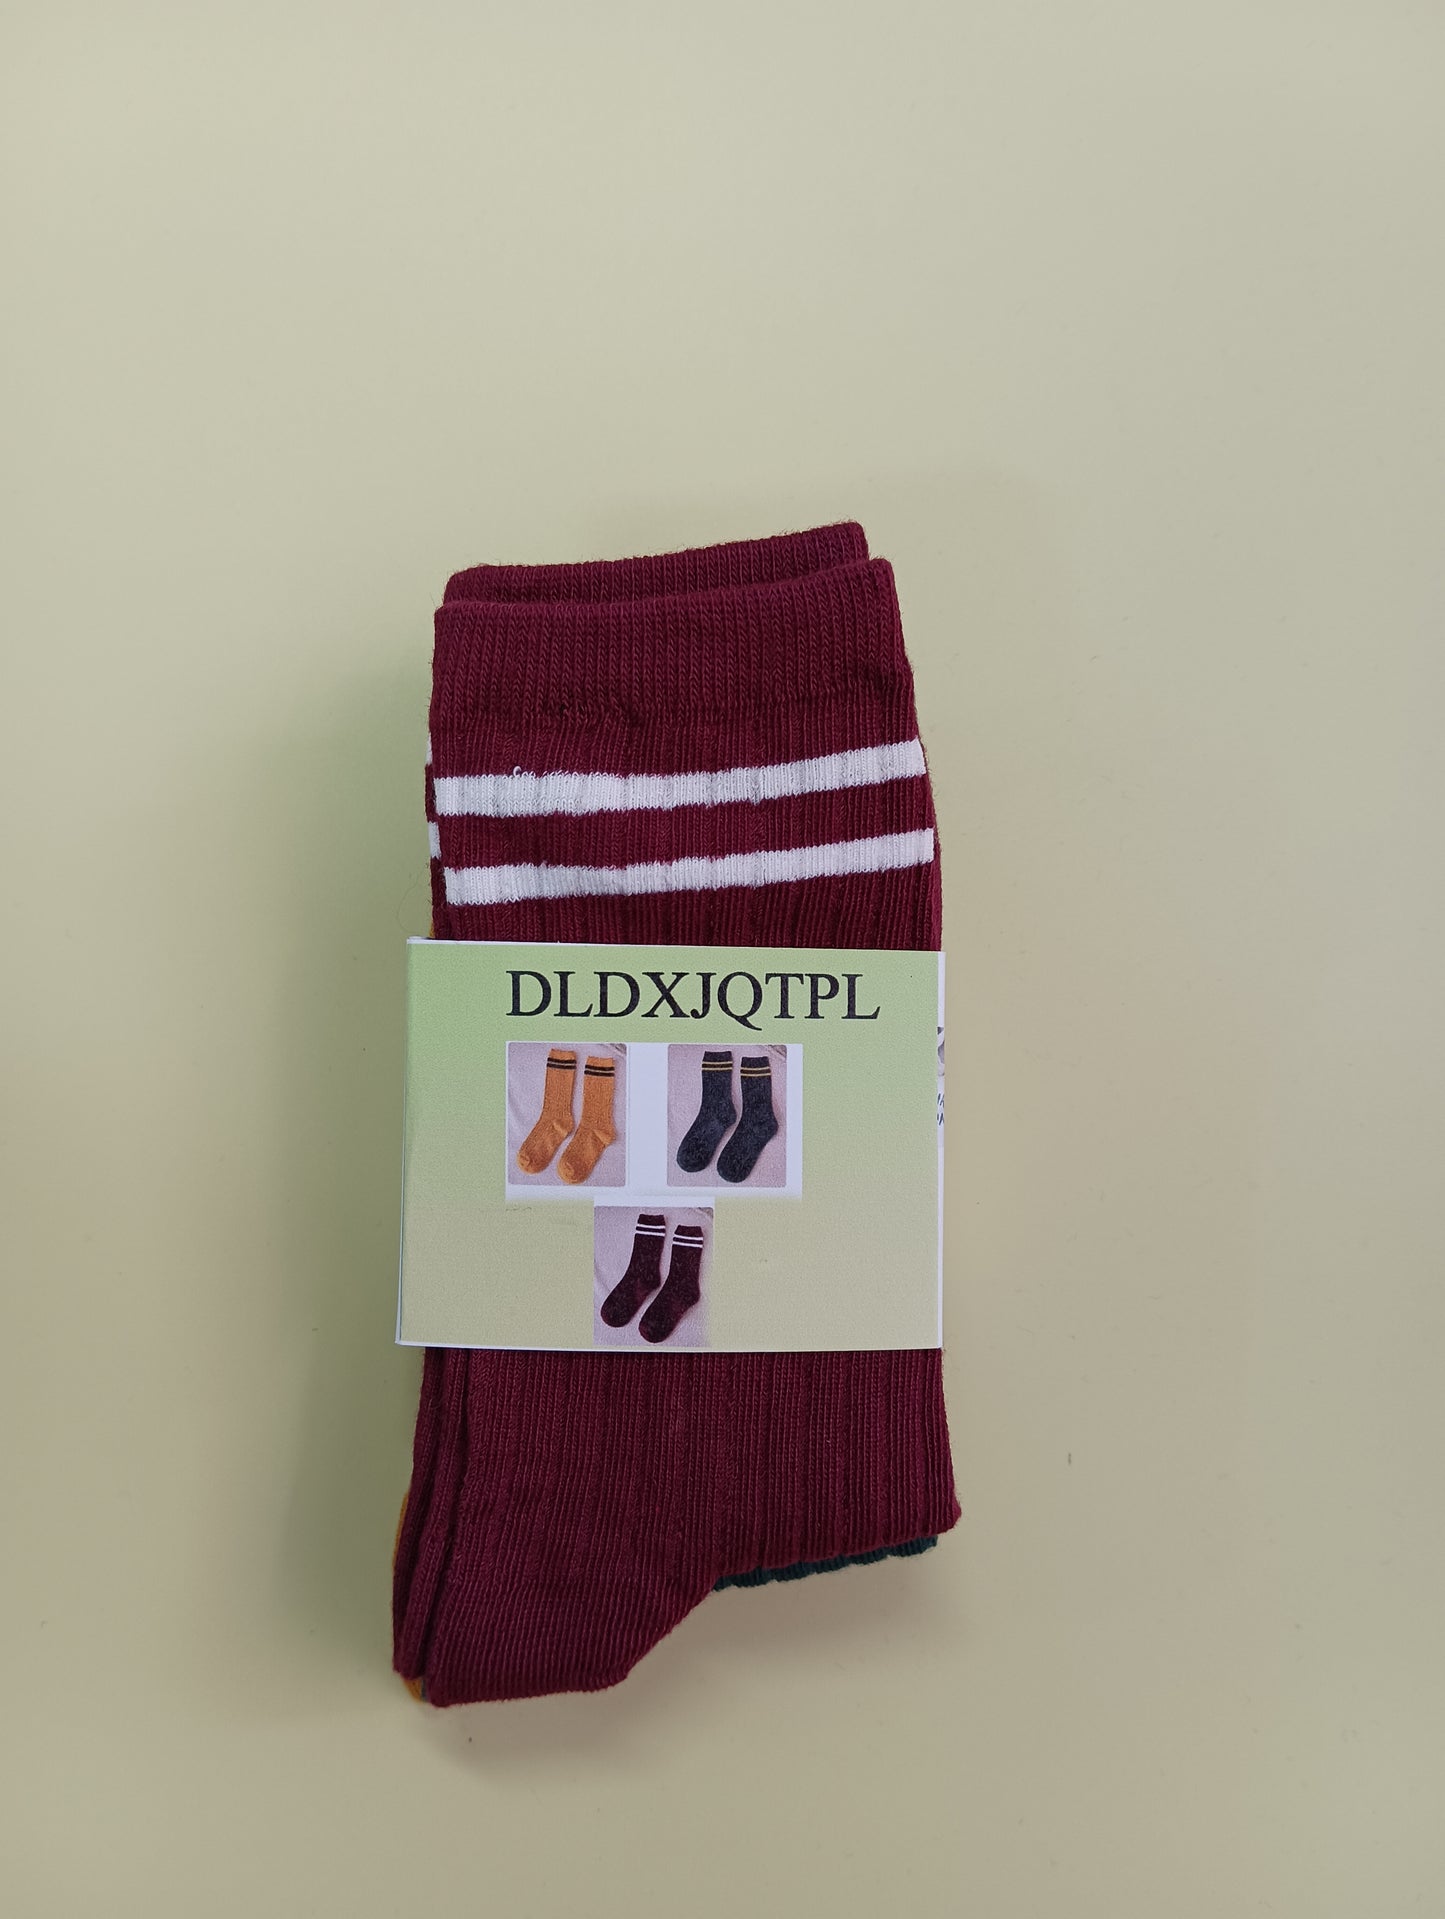 DLDXJQTPL cotton socks, simple style, striped socks, 3 pairs of red/yellow/green, soft and breathable, no hair loss and no odor